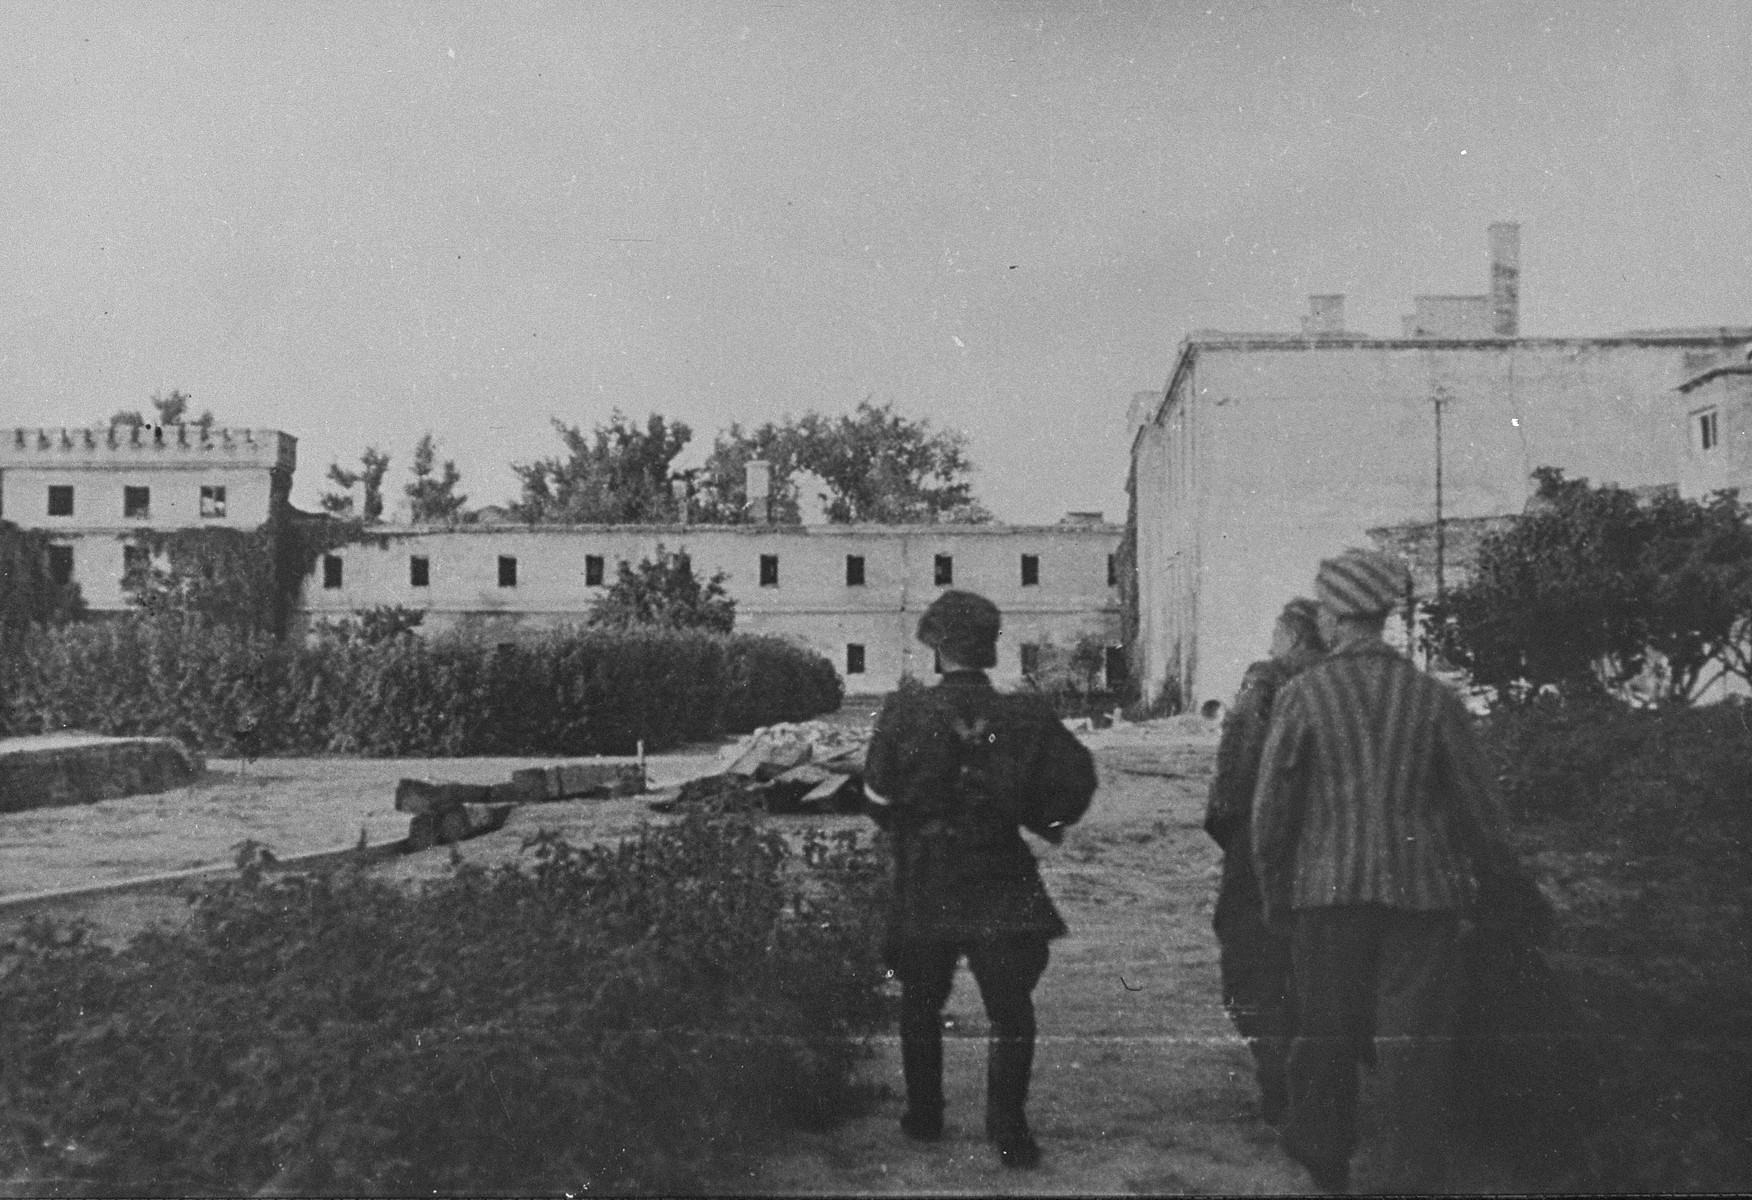 A member of the Zoska battalion of the Armia Krajowa escorts two of 348 Jews liberated from the Gesiowka concentration camp by the battalion, during the 1944 Warsaw Uprising.